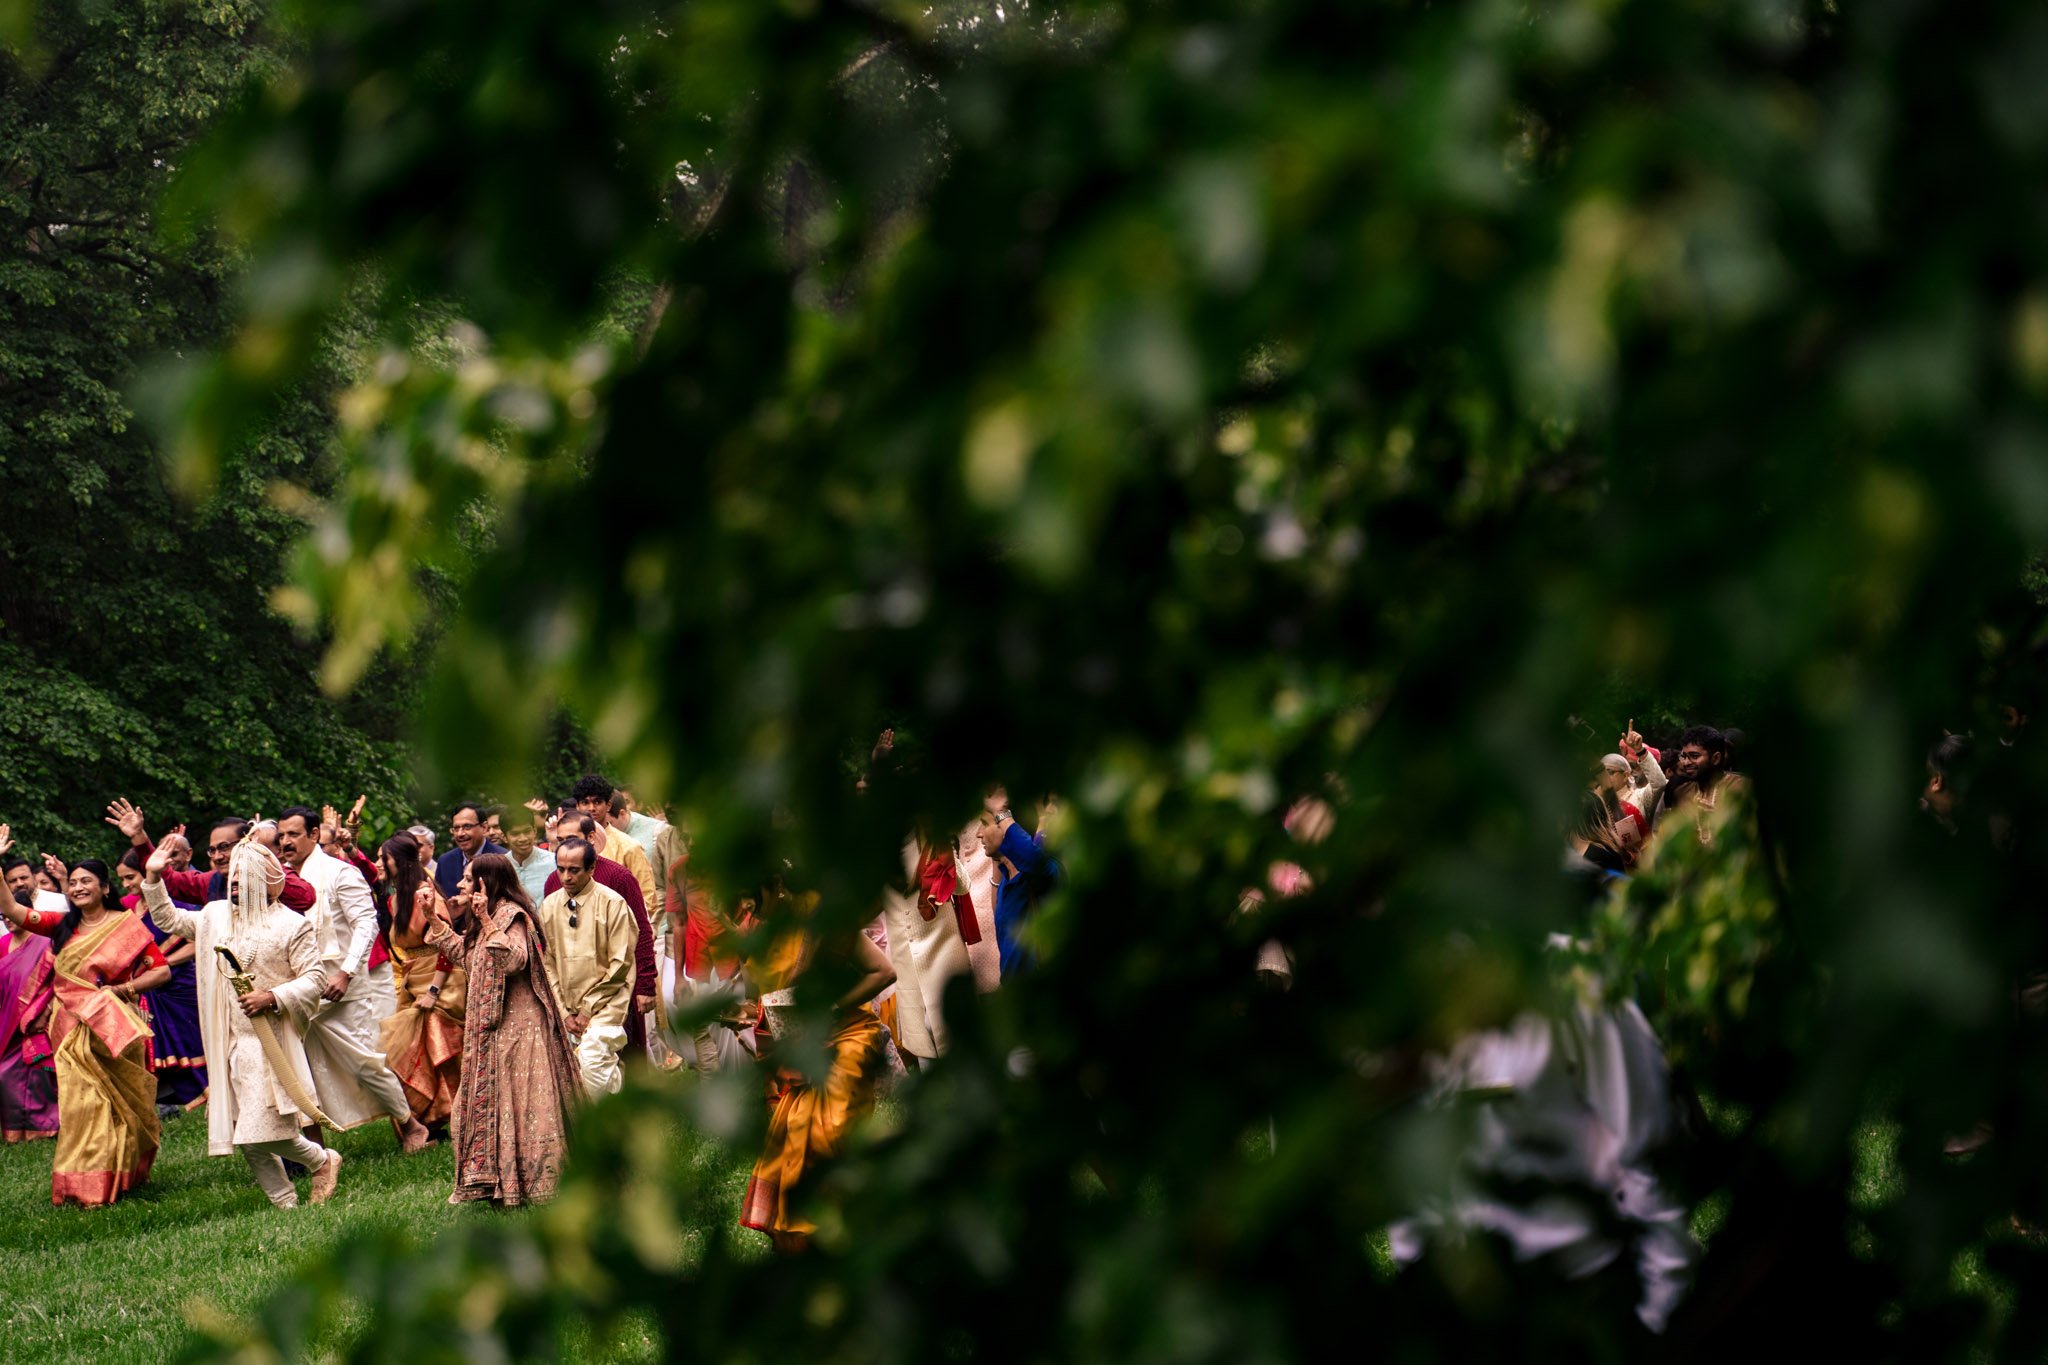 A group of people walking through a grassy area at a Biltmore Estate wedding.